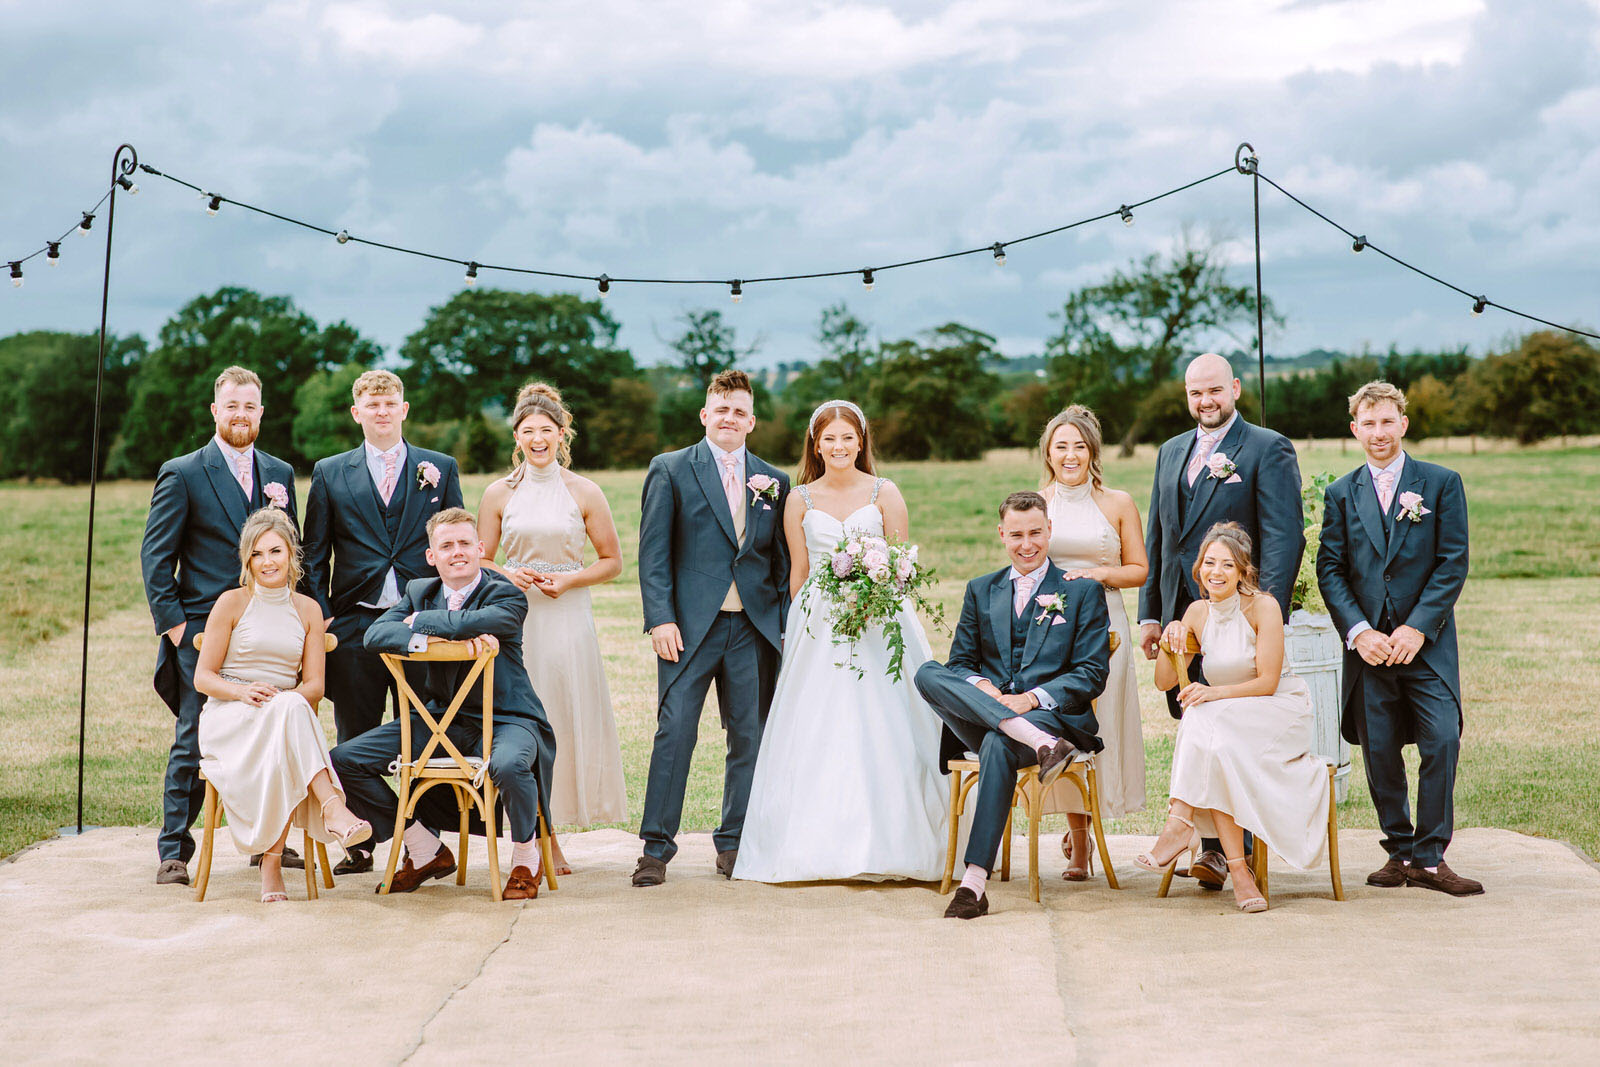 A wedding party posing for a photo in a field at warwickshire farm.